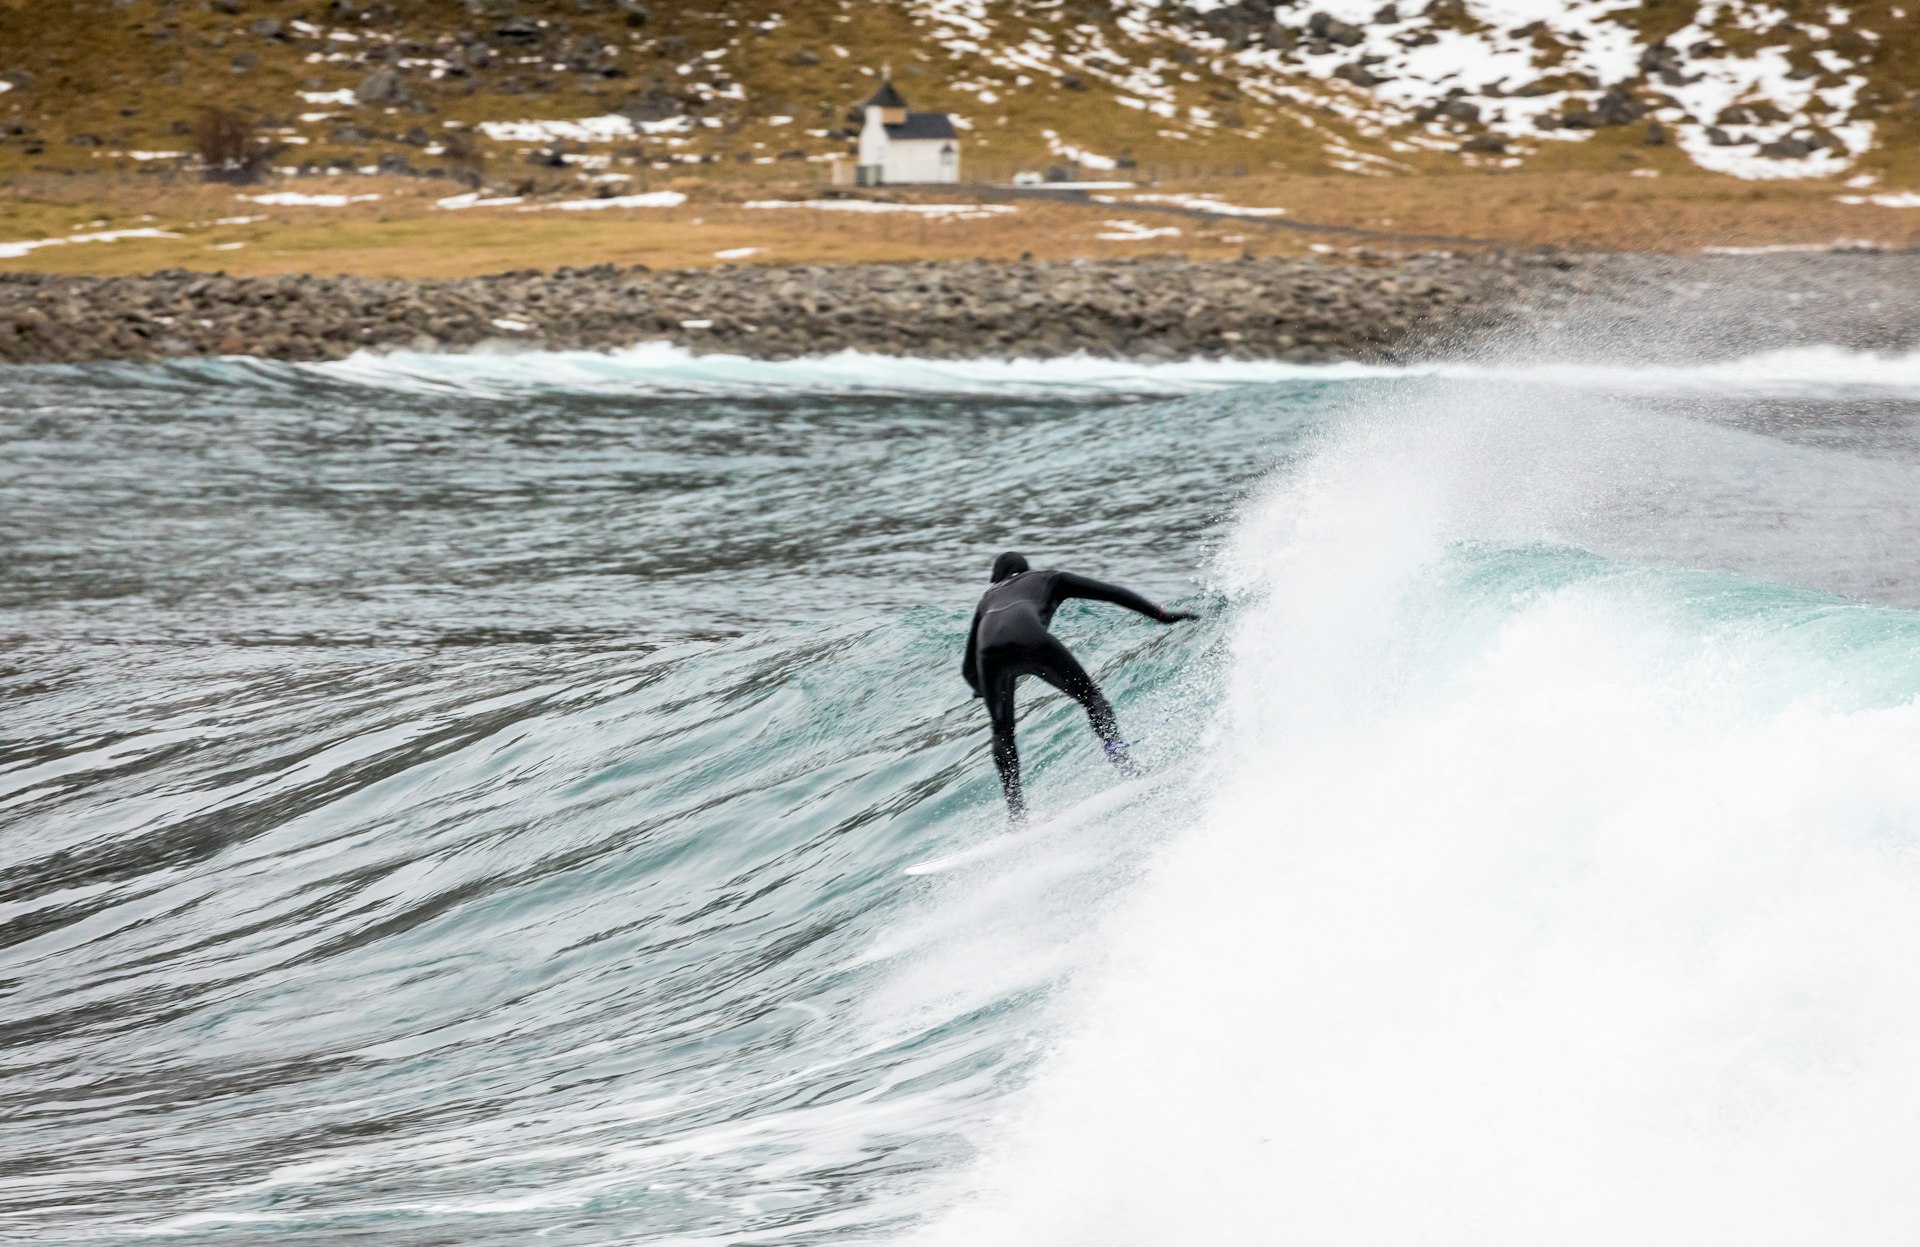 A surfer in full gear covering them head to toe surfs a wave at a bay. There is snow on the rocks of the beach.